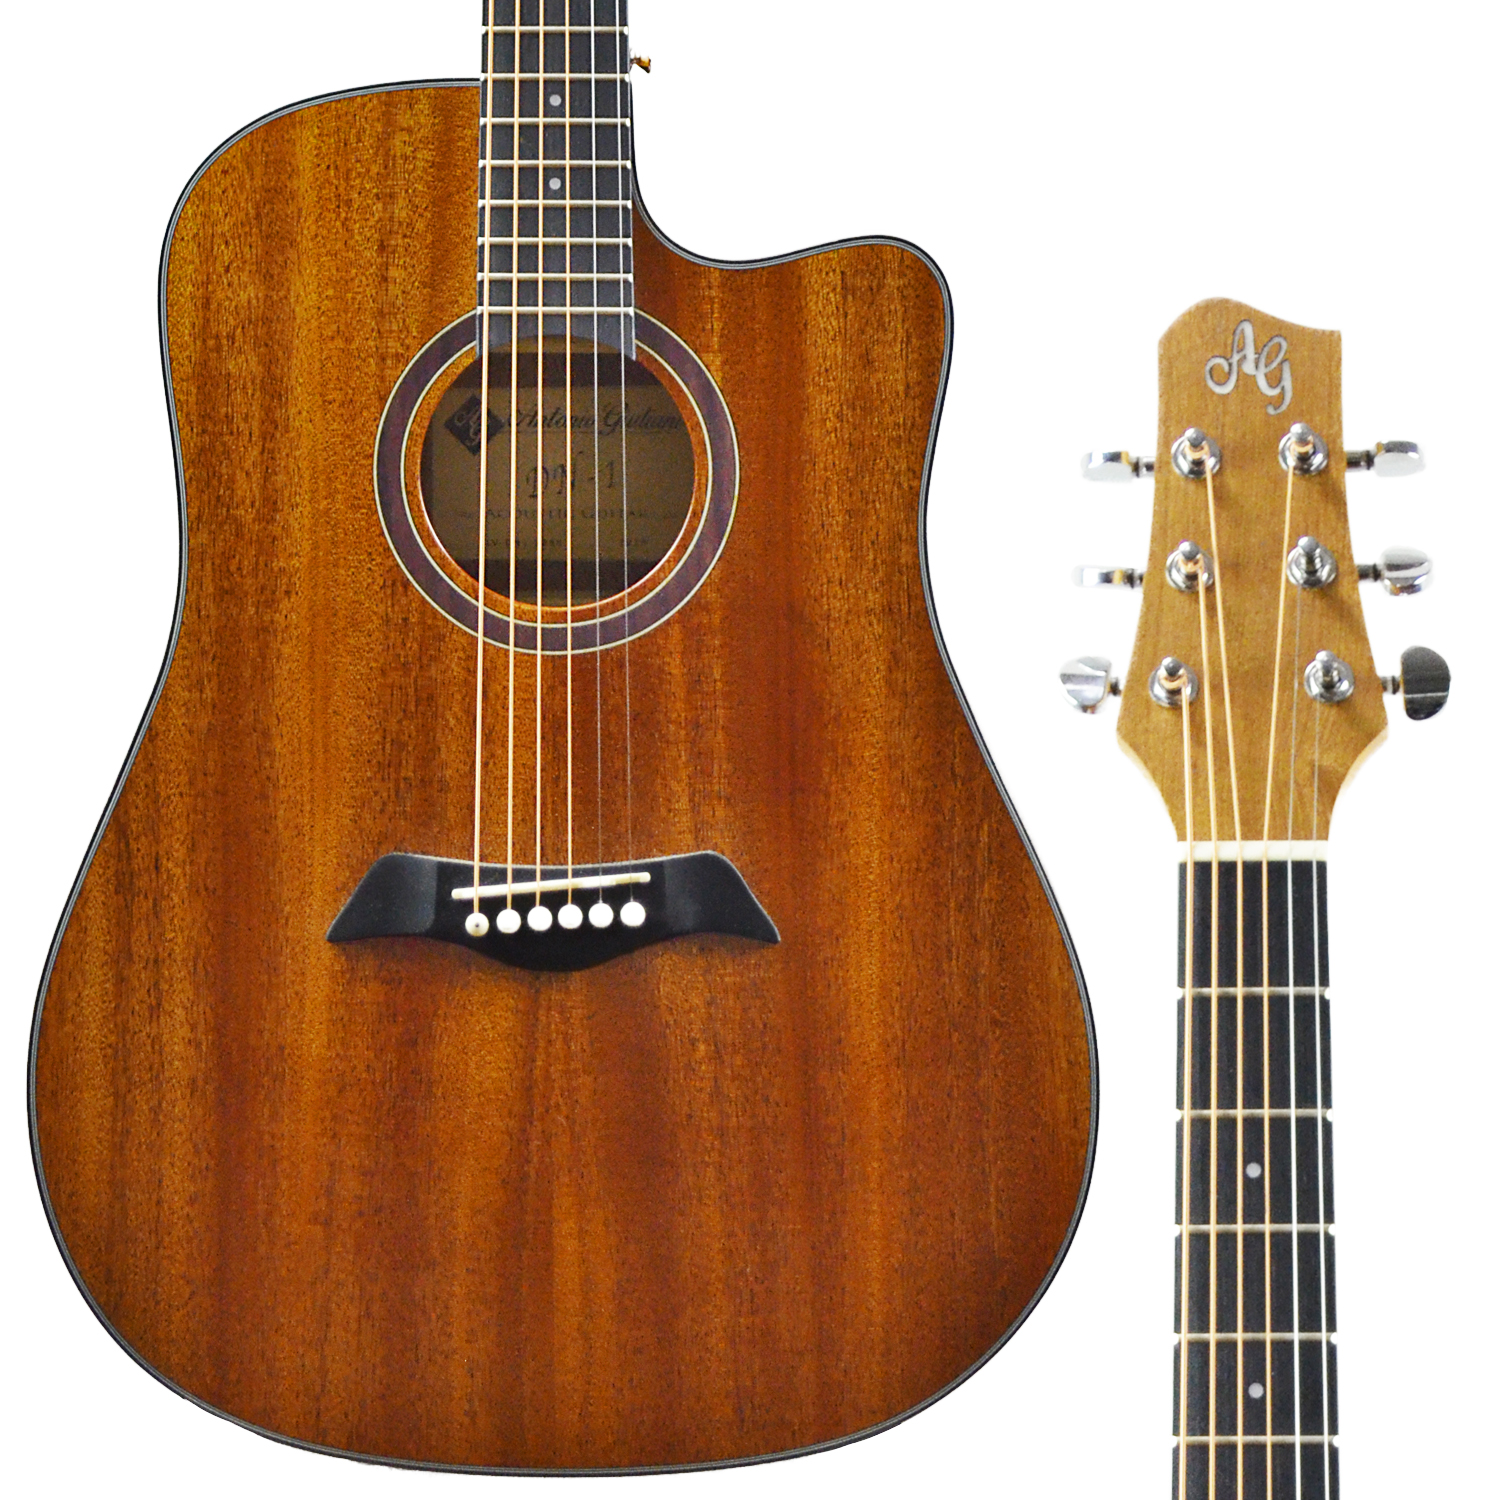 CLEARANCE Antonio Giuliani DN-1 Dreadnought Cutaway Acoustic Guitar Outfit in action